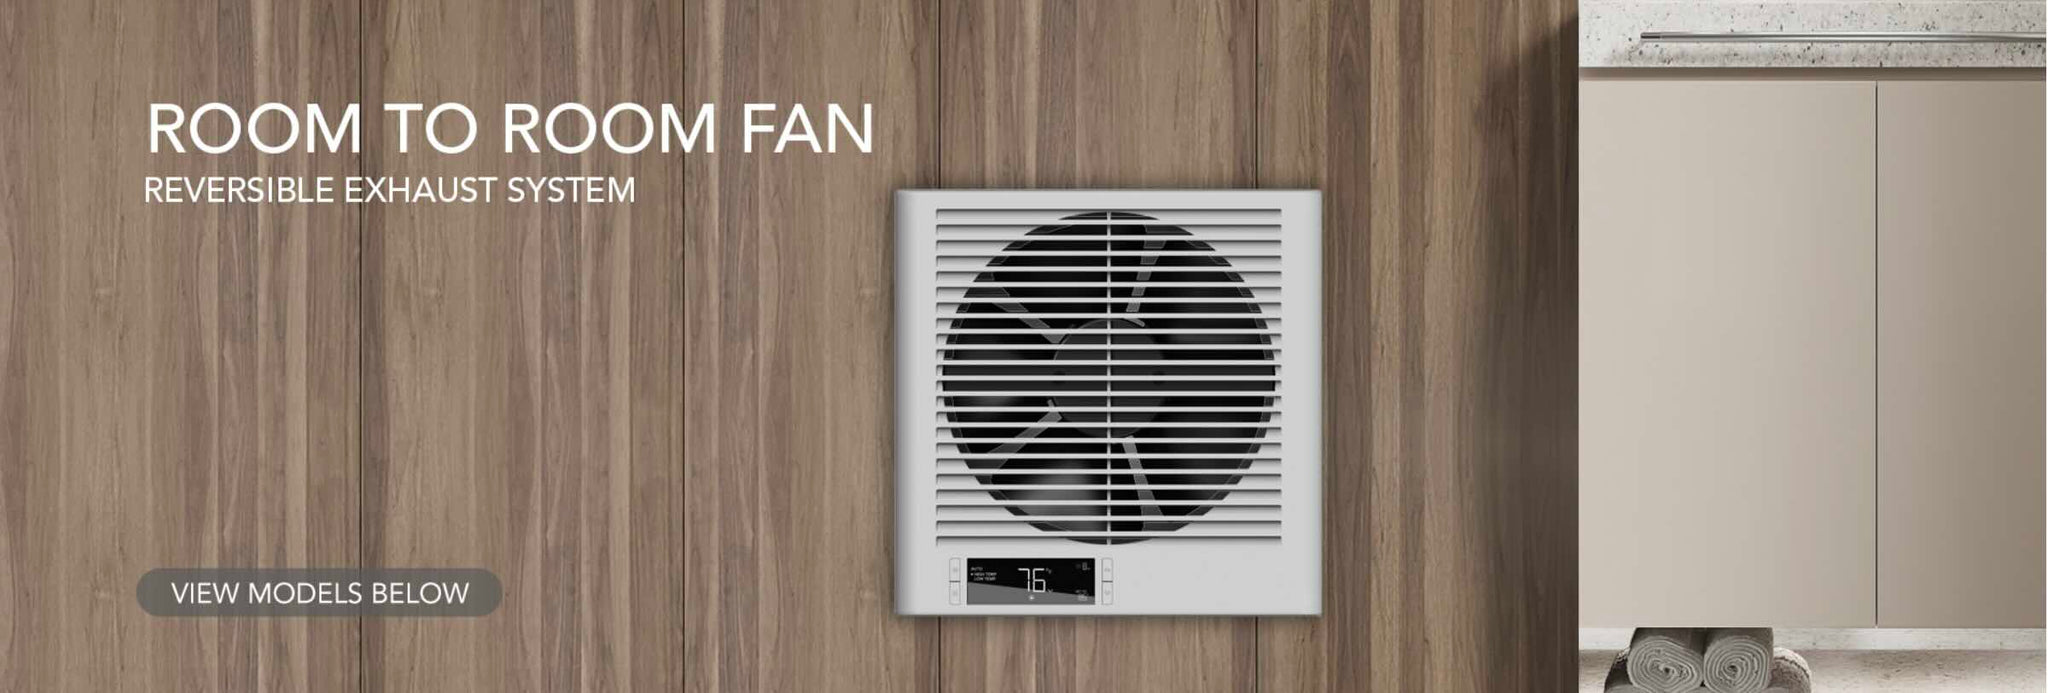 Room to room fan with reversible exhaust system